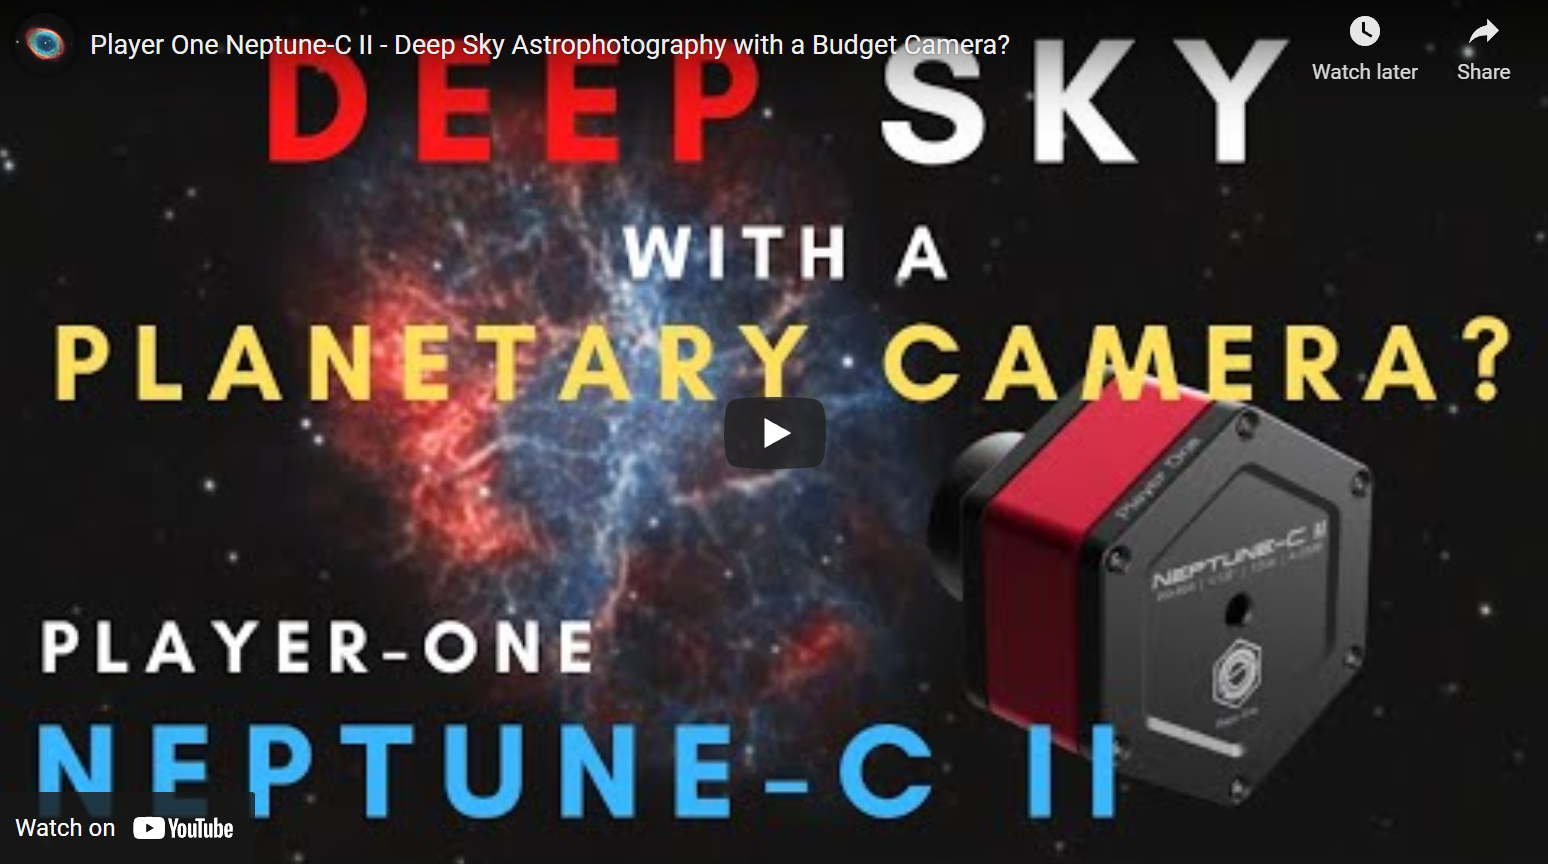 Luke : Player One Neptune-C II – Deep Sky Astrophotography with a Budget Camera?